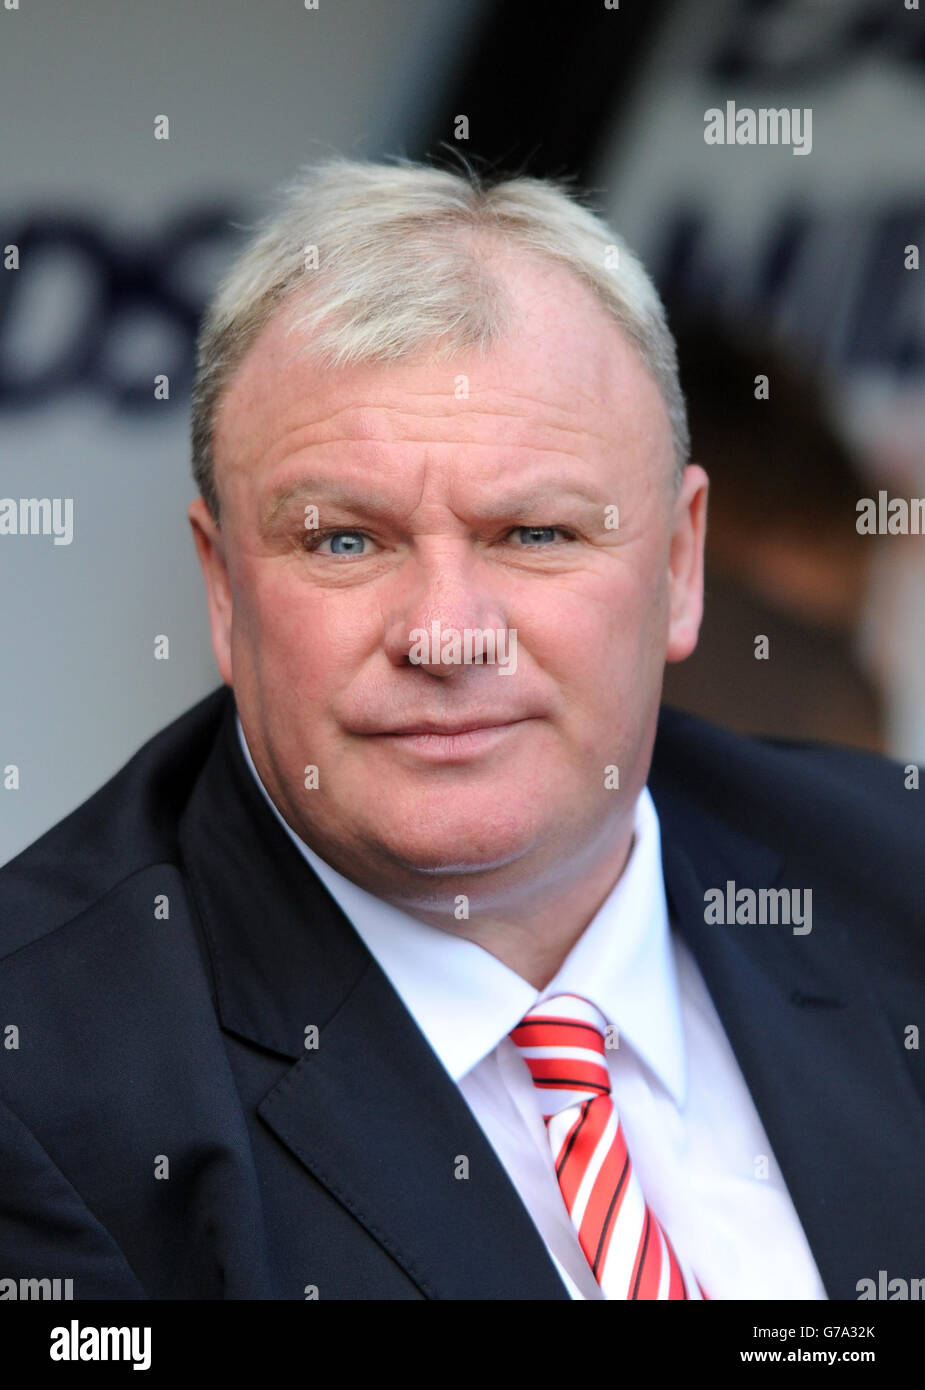 Soccer - Sky Bet Championship - Derby County v Rotherham United - iPro Stadium. Rotherham United manager Steve Evans takes his seat on the touchline before kick-off Stock Photo